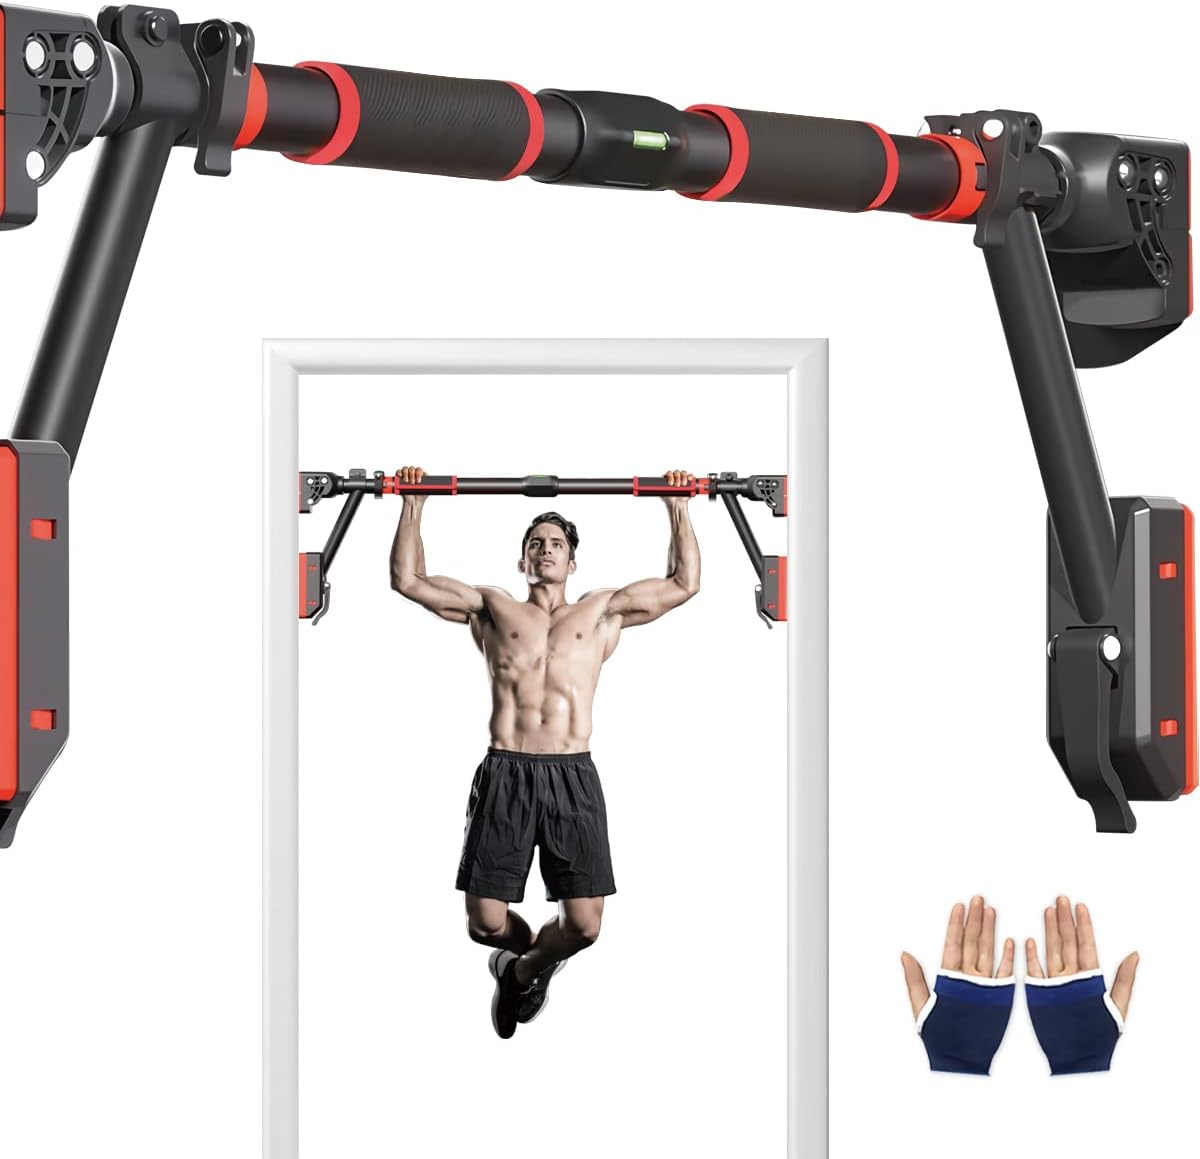 Pull Up Bar Doorway, Door Frame Chin Up Bar with Locking Adjustable Width Upper Body Workout Bar No Screw Wall Mounted Gym System Trainer Non-Slip Door Exercise Equipment for Home Fitness Sports